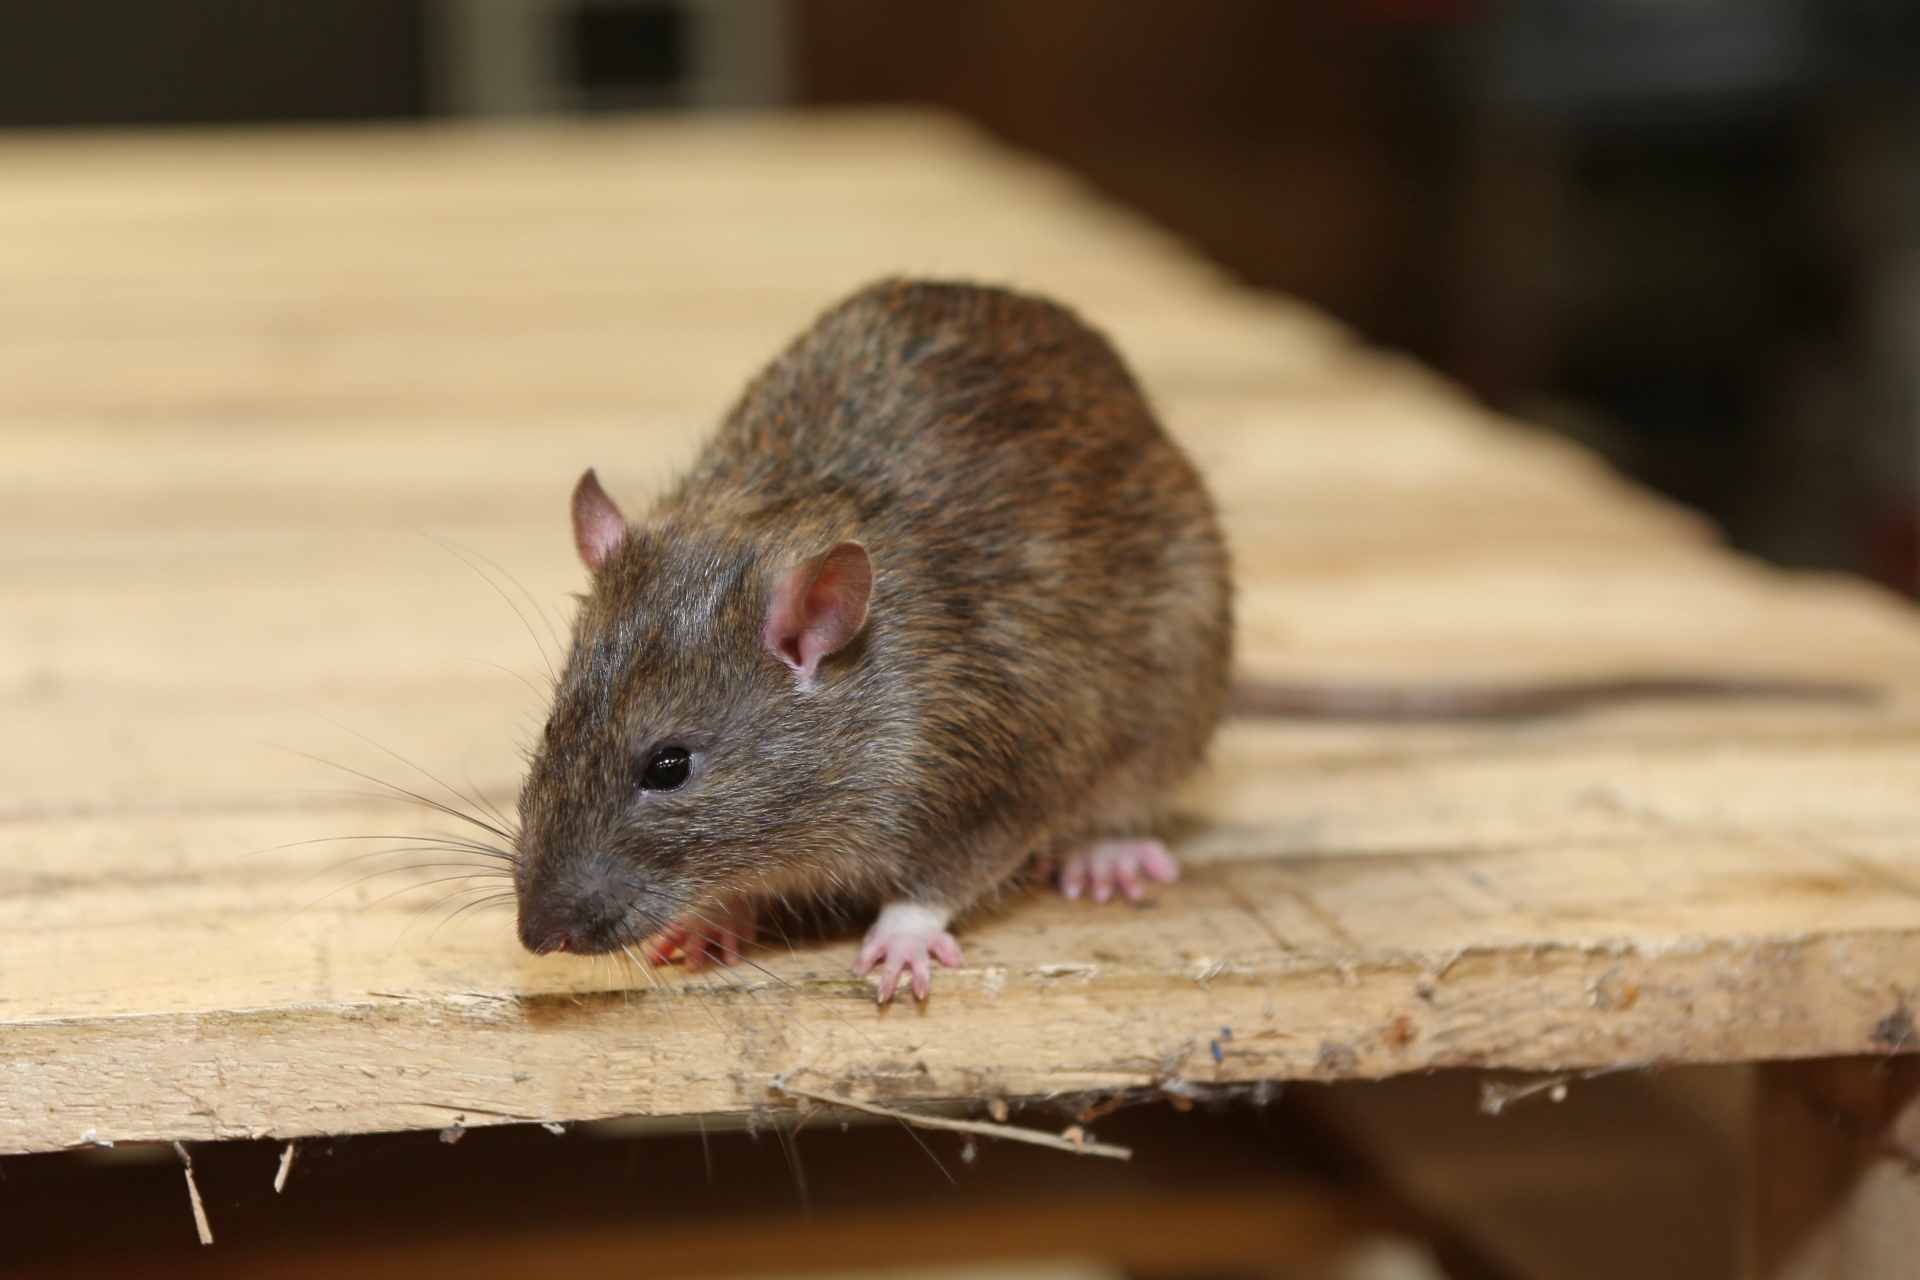 Rat extermination, Pest Control in Earl's Court, SW5. Call Now 020 8166 9746